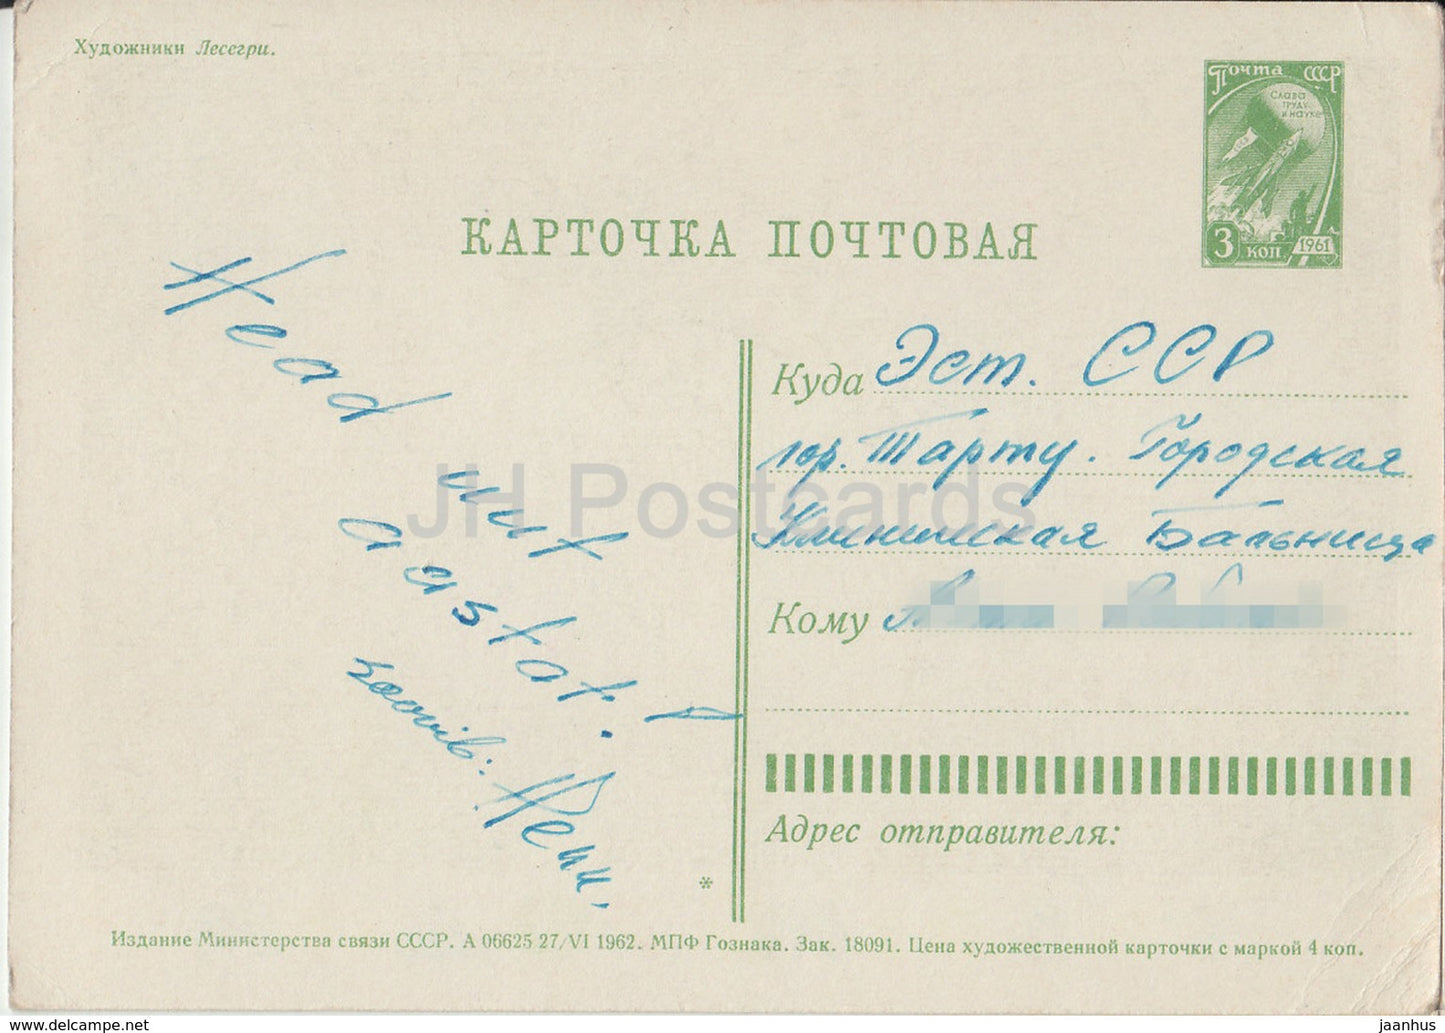 New Year Greeting Card by Lesegri - Fir Tree - postal stationery - 1962 - Russia USSR - used